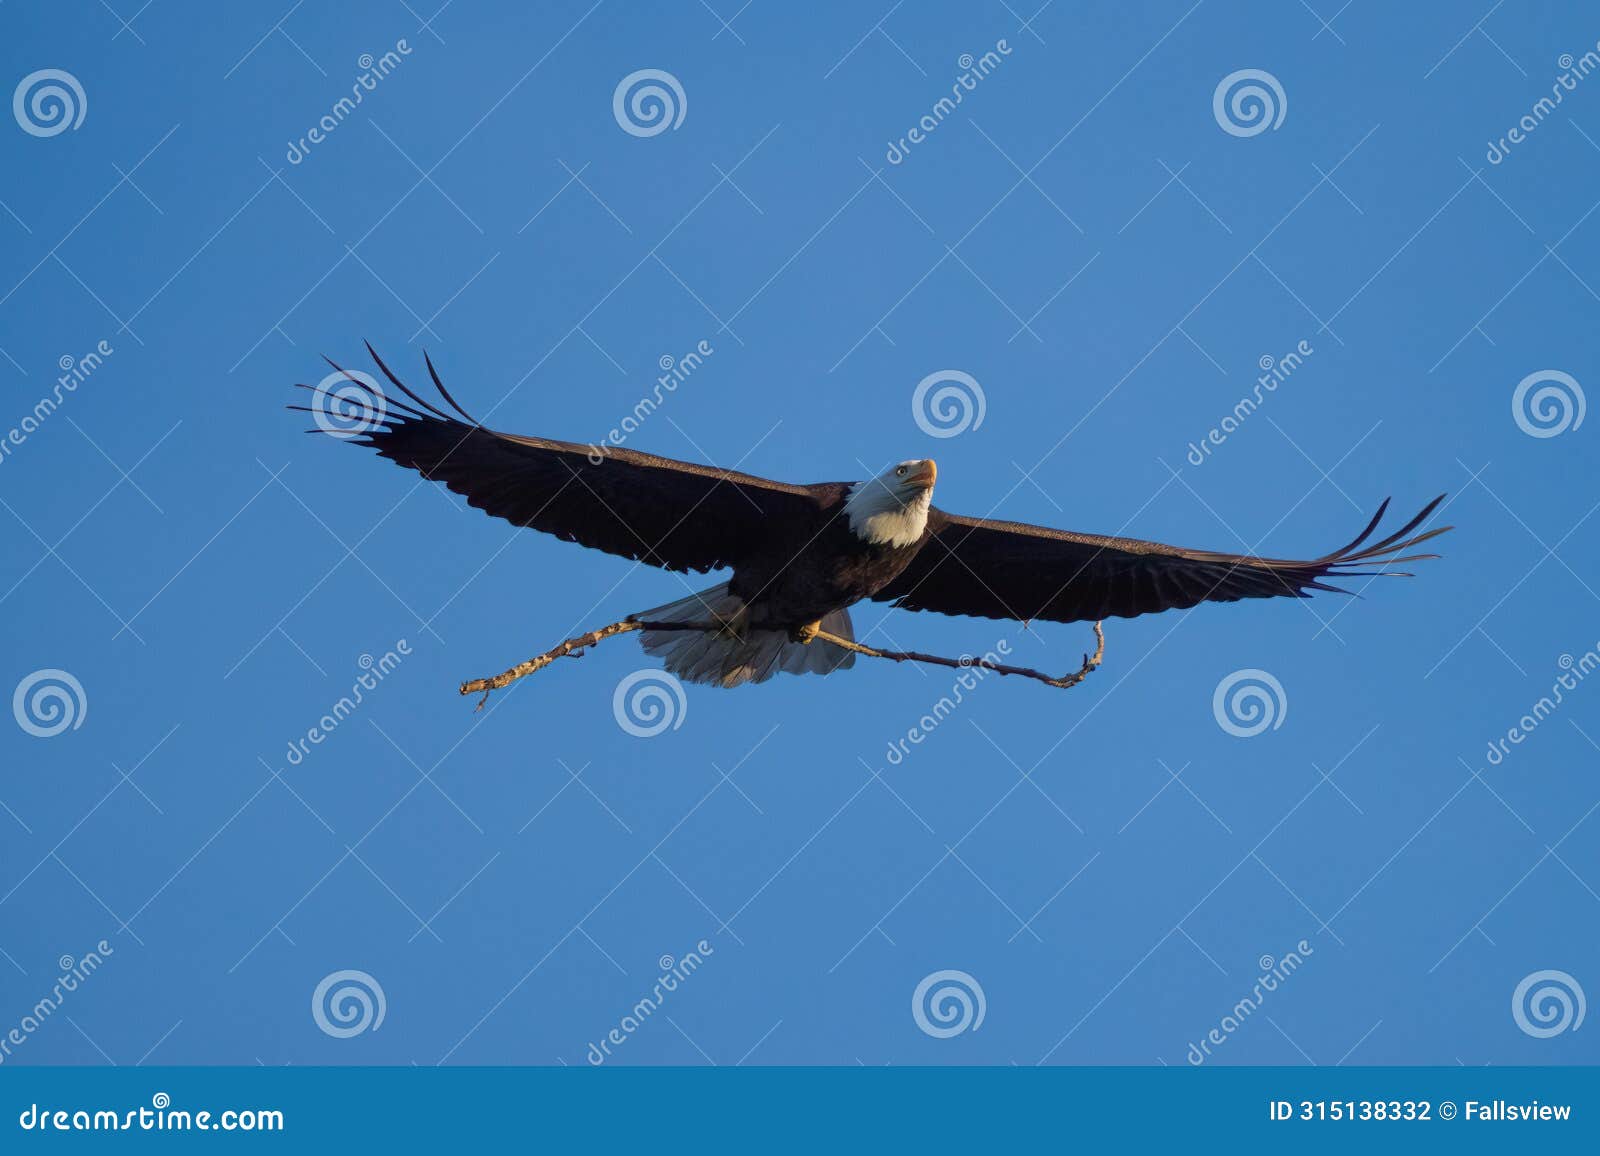 bald eagle gliding in the sky